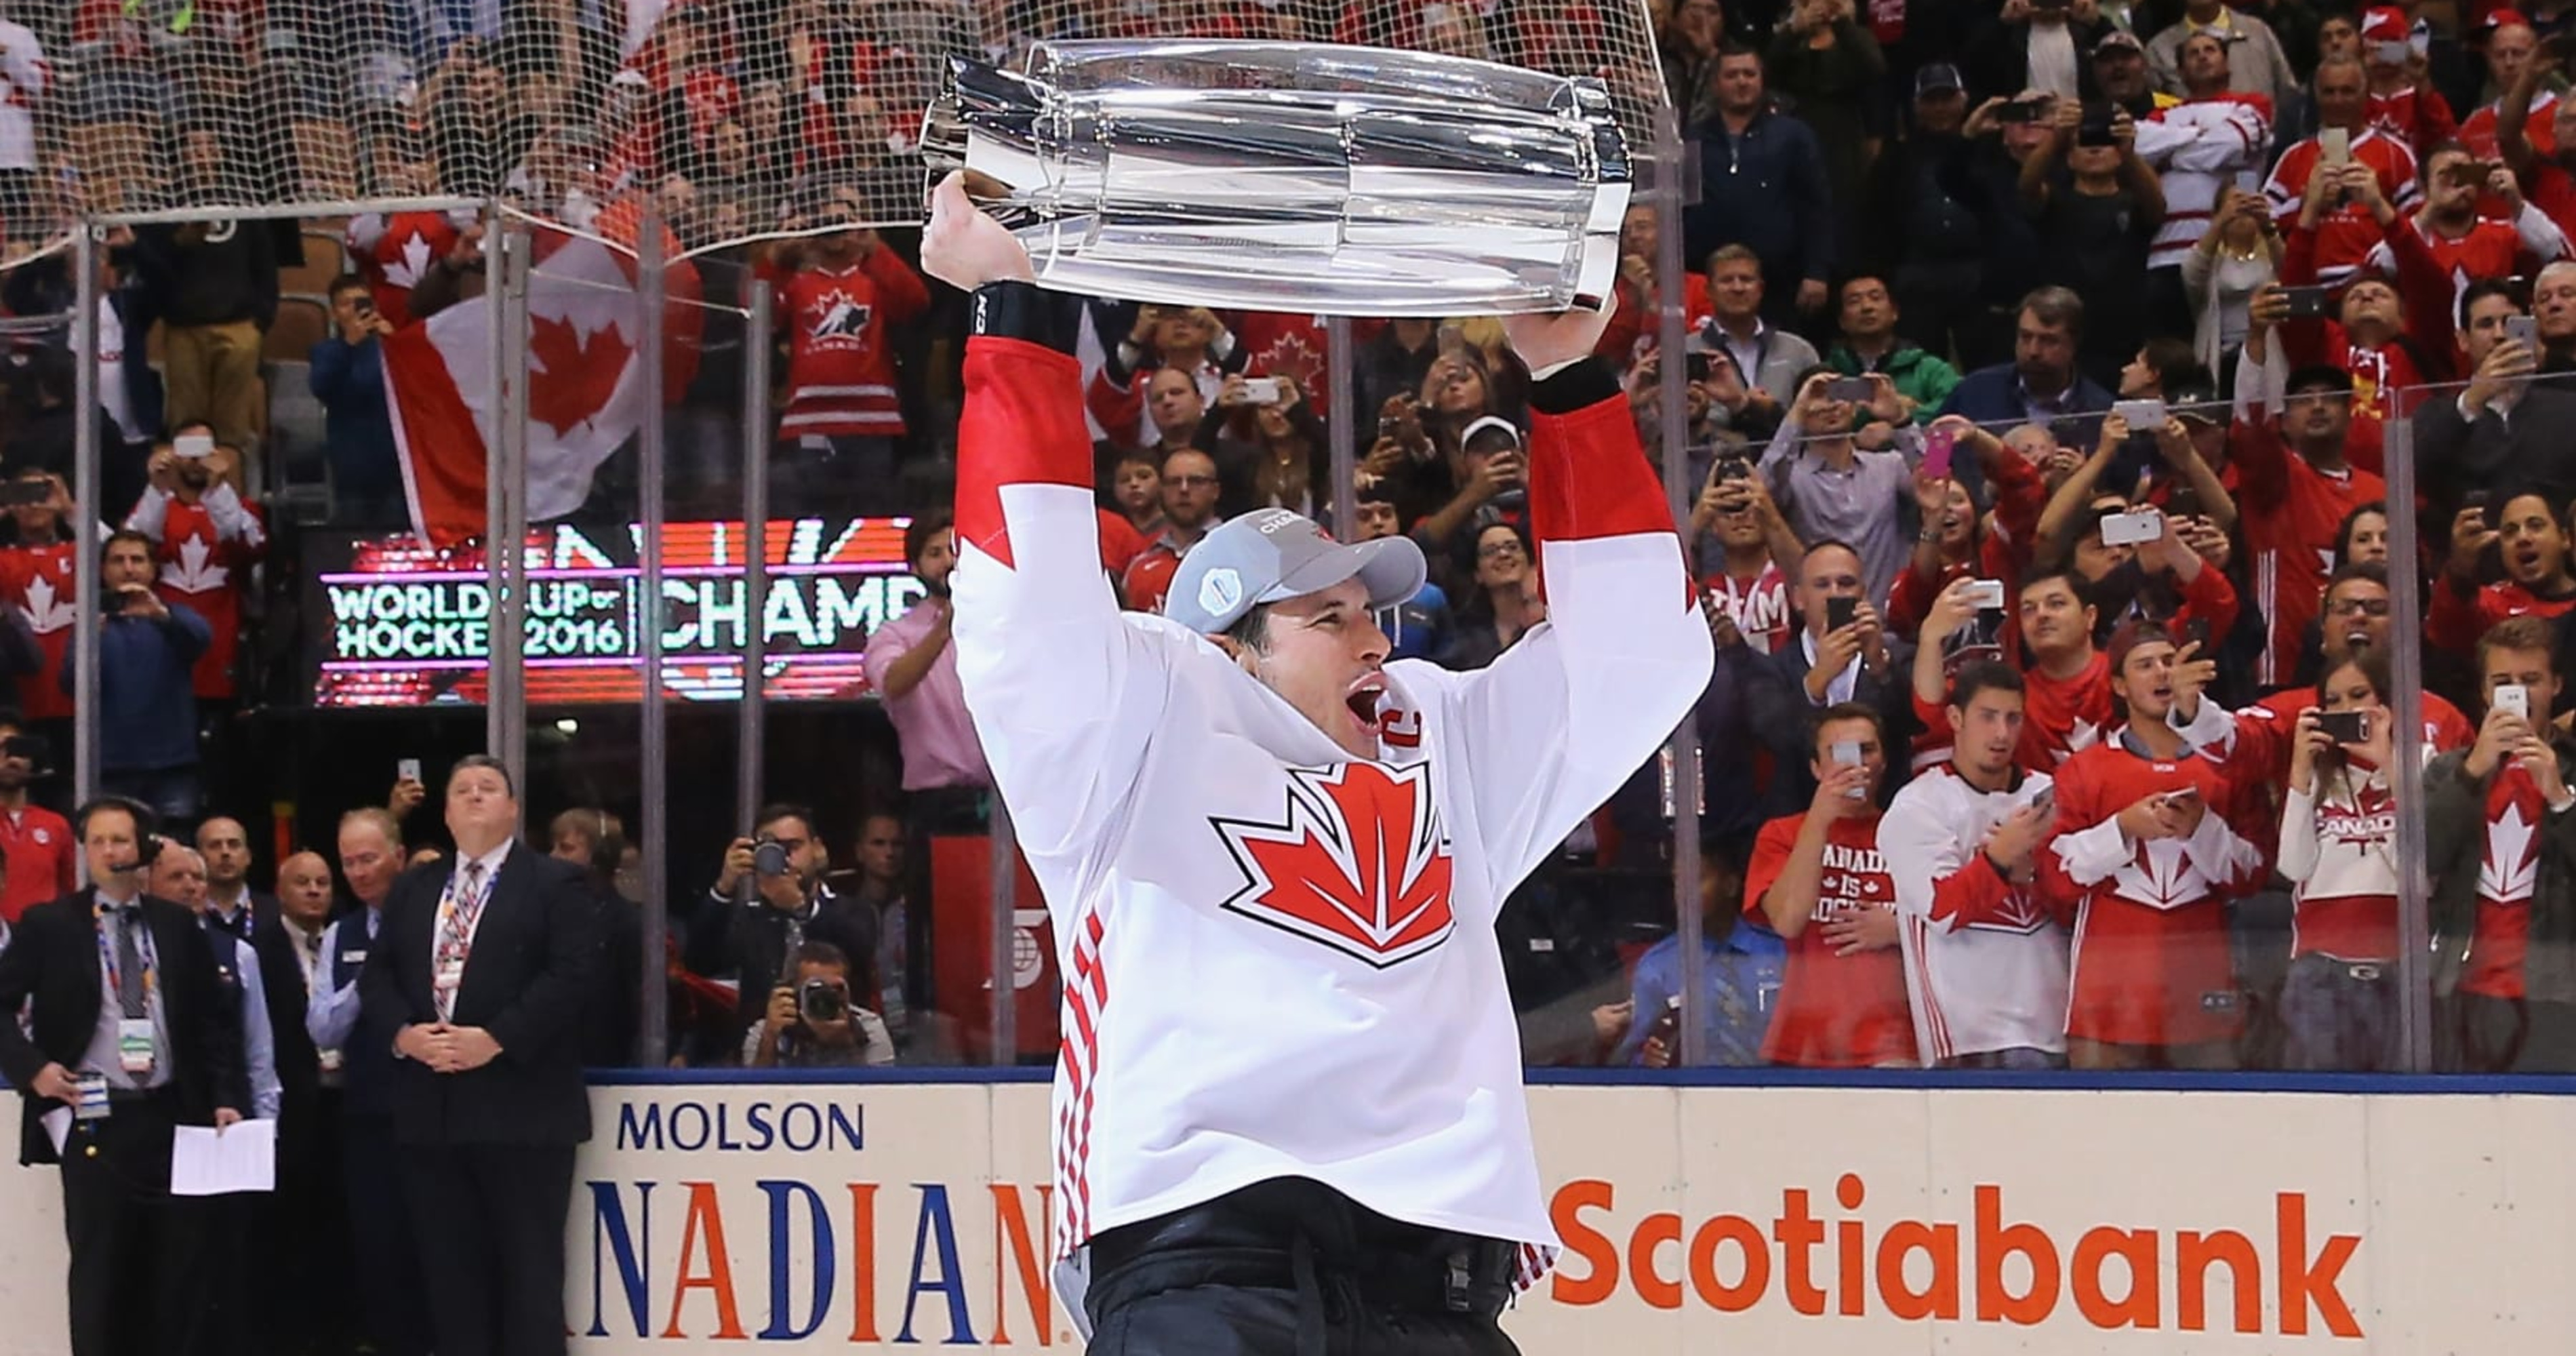 Is the idea of cheering for 'Canada's Team' in the NHL playoffs